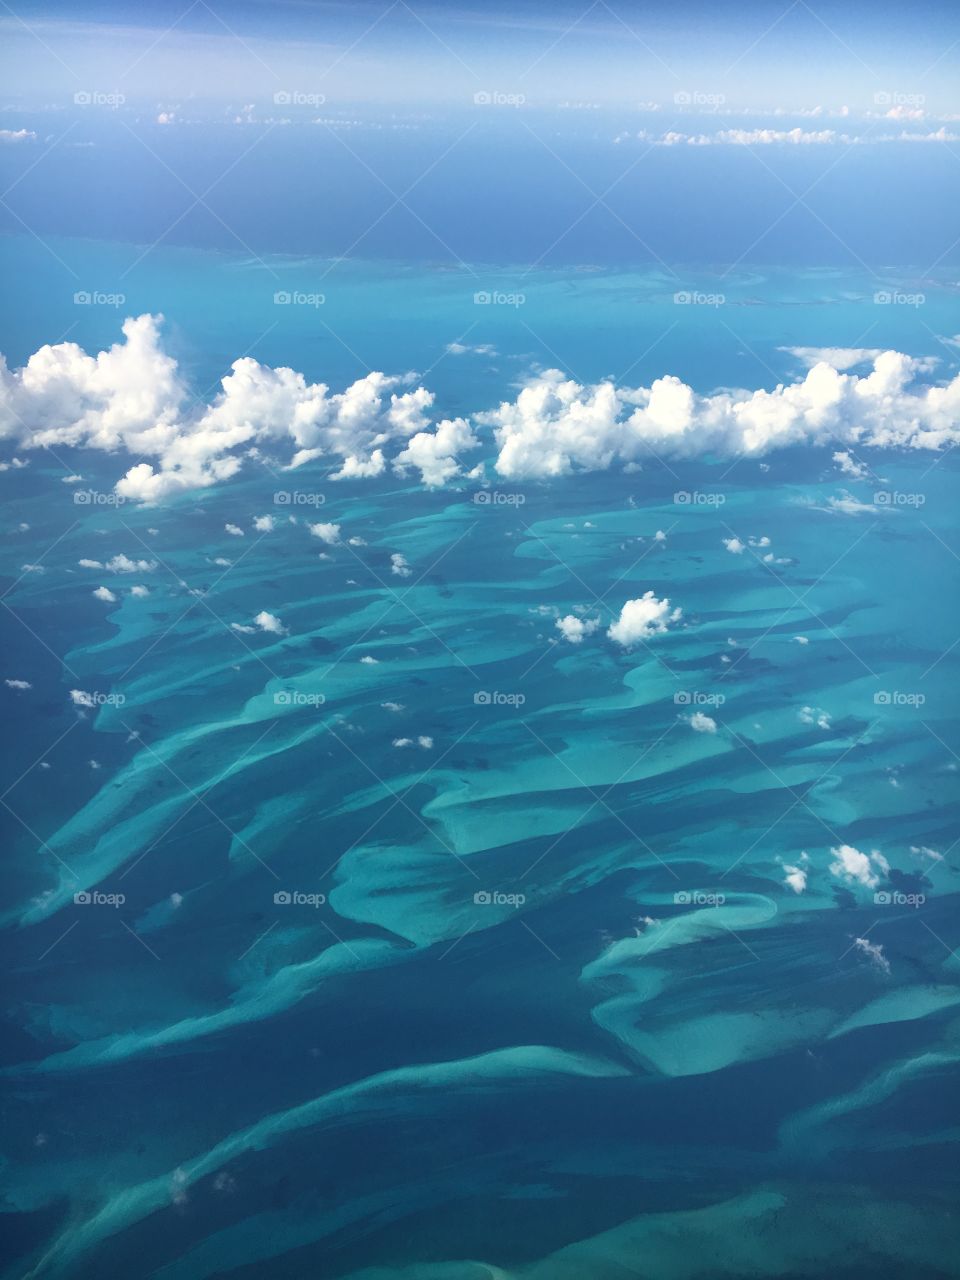 shot with an Iphone from an airplane window, beautiful reef and clear waters near the Bahamas